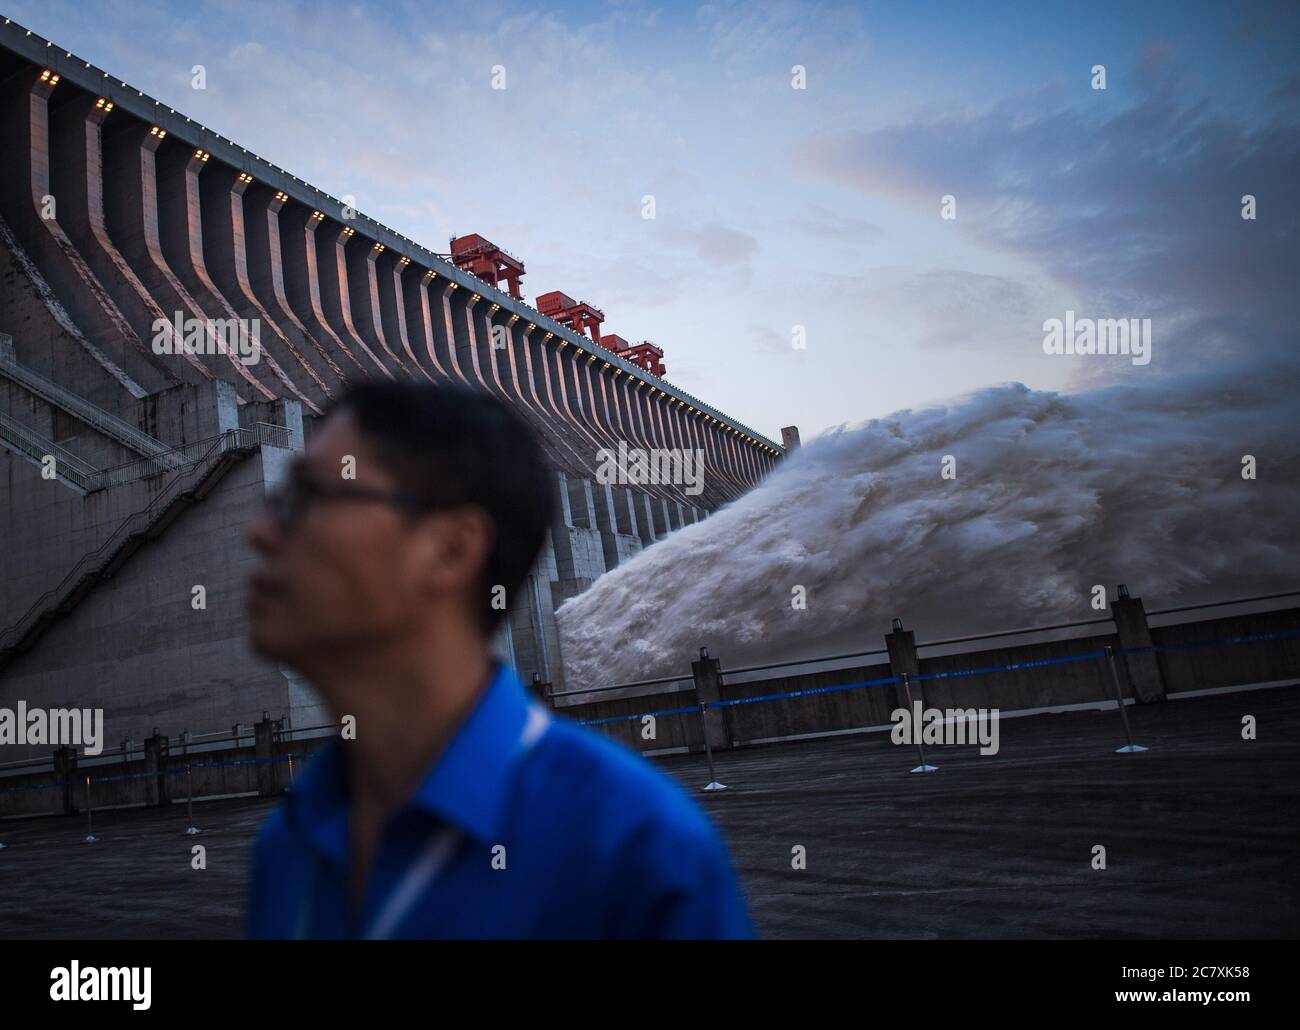 Yichang. 20th July, 2020. A staff member inspects the Three Gorges Dam as floodwater is discharged from the hydraulic structure in central China's Hubei Province. The second flood of China's Yangtze River this year has smoothly passed the Three Gorges Dam on Sunday as the inflow into the reservoir has decreased. The Three Gorges reservoir saw an inflow of 46,000 cubic meters per second at 8 p.m. Sunday, compared with a peak of 61,000 cubic meters per second, which appeared at 8 a.m. Saturday and lasted for 18 hours. Credit: Xiao Yijiu/Xinhua/Alamy Live News Stock Photo